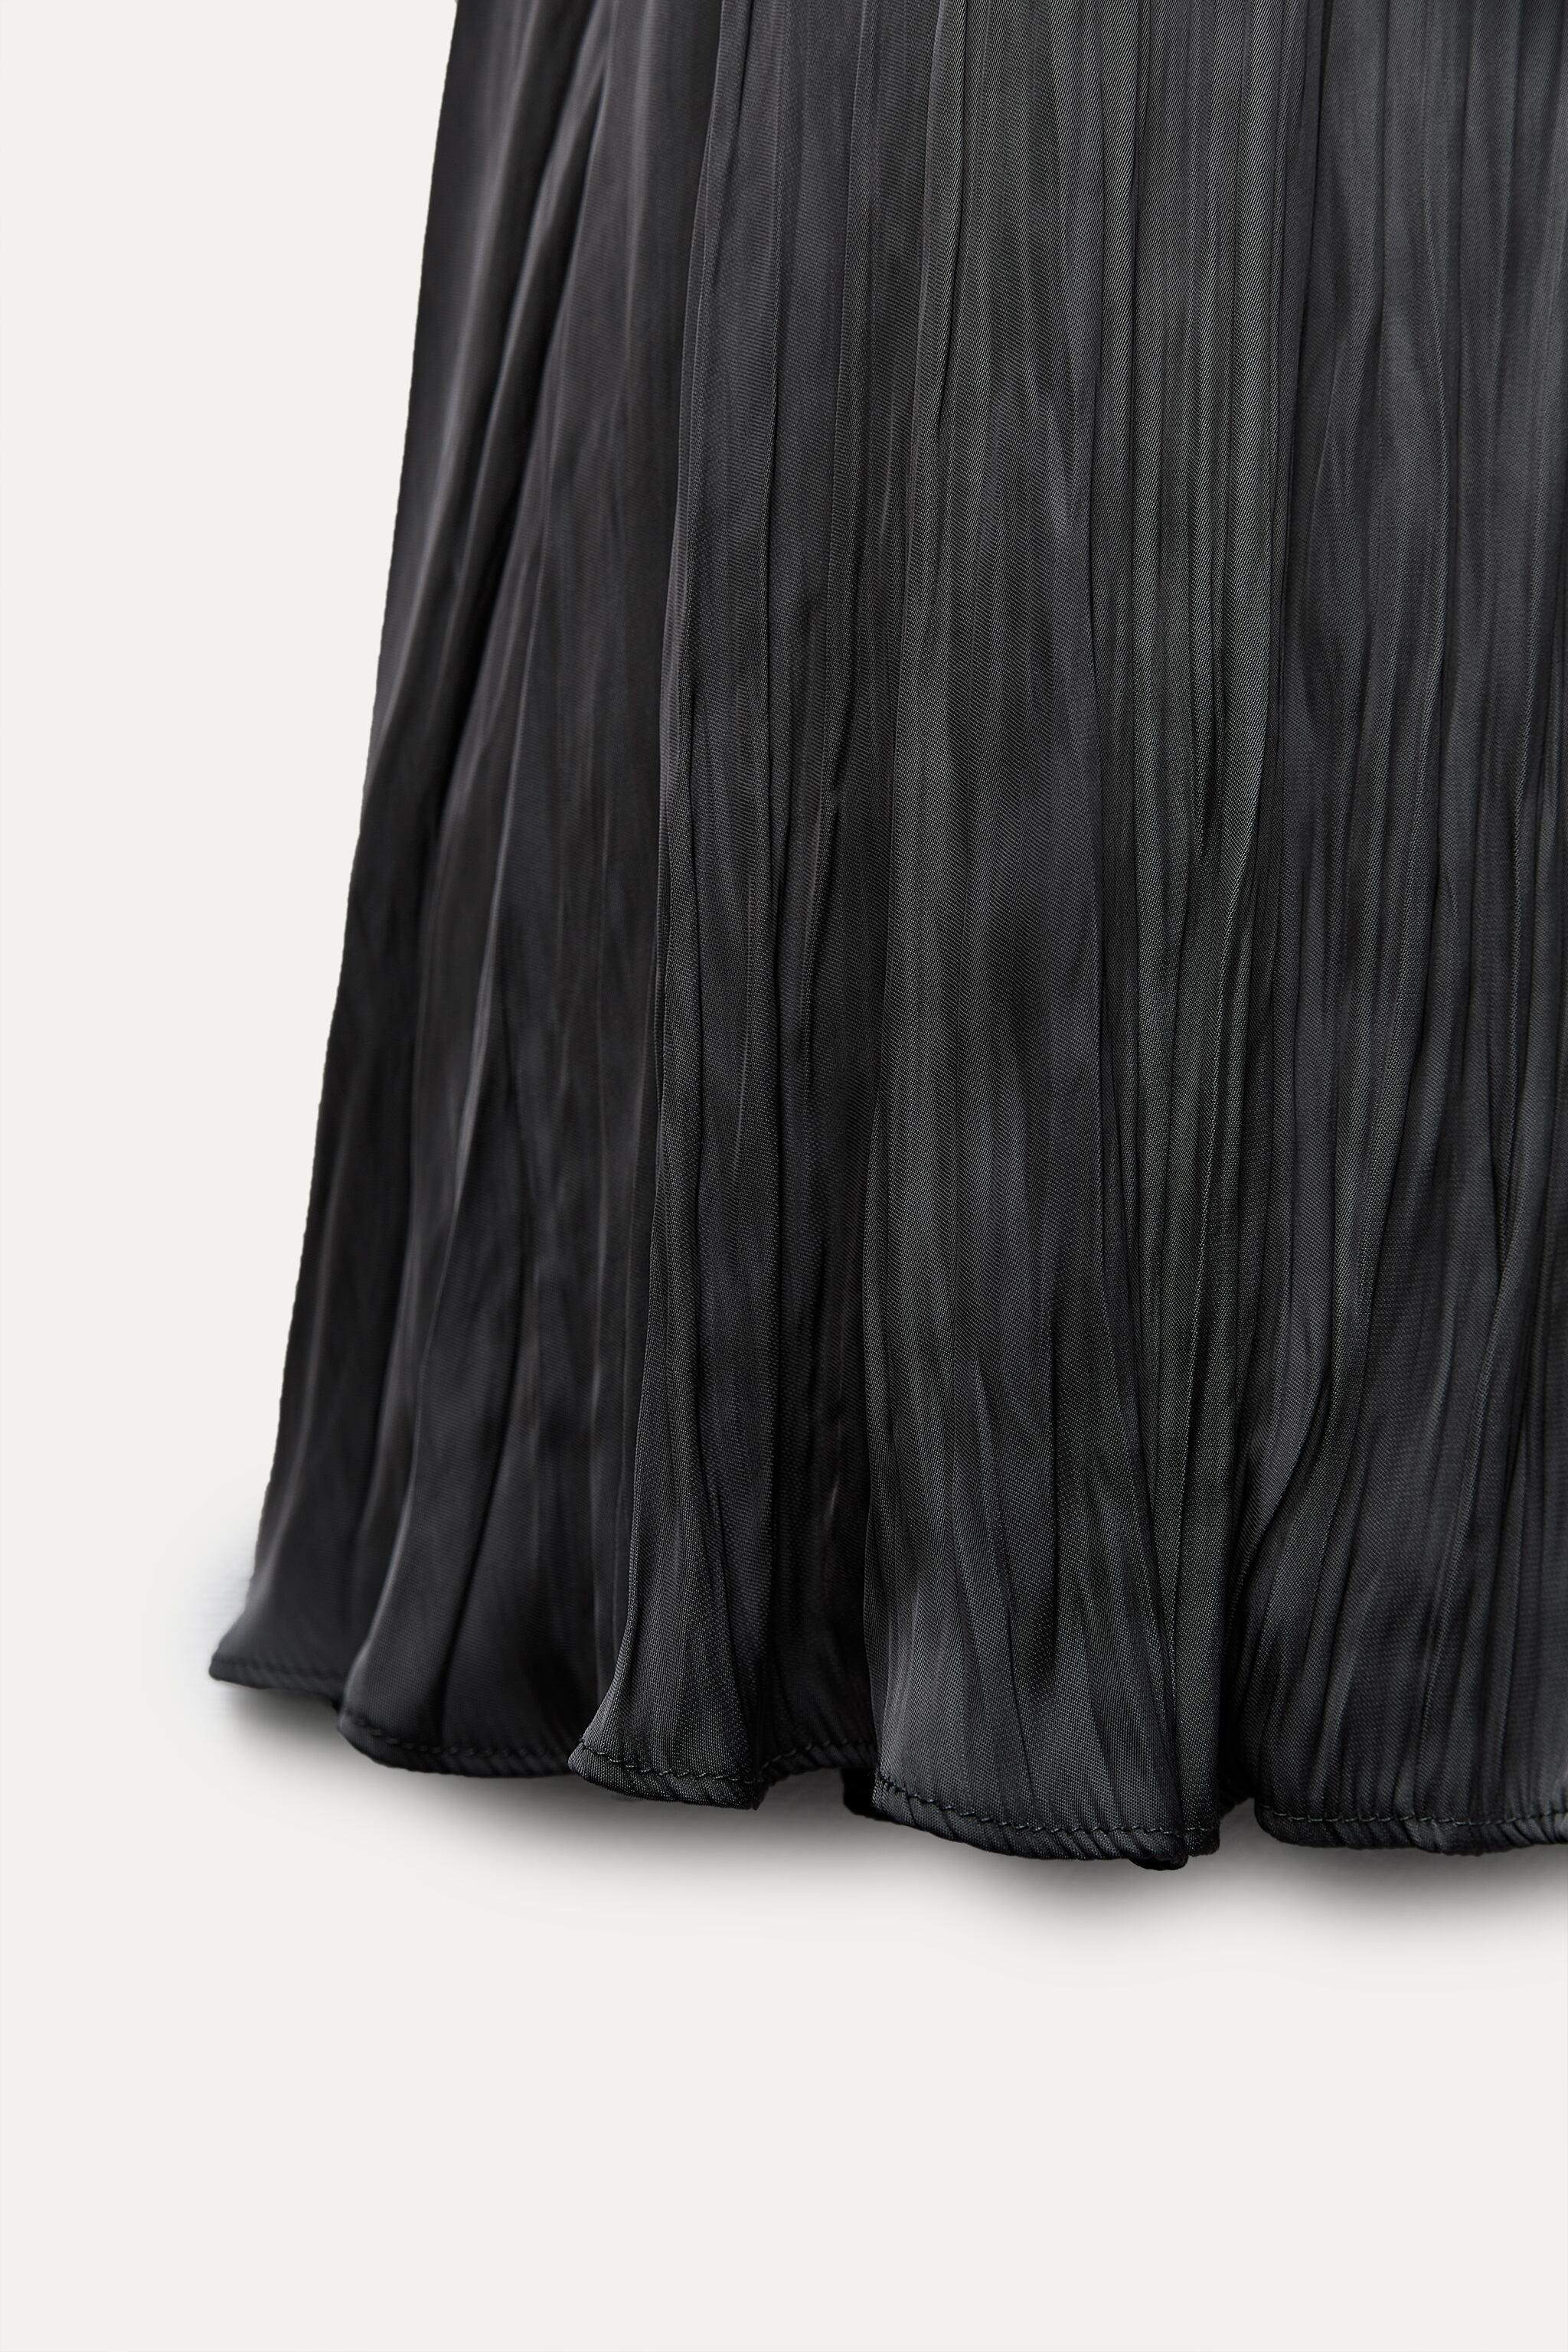 SATIN EFFECT PLEATED SKIRT ZW COLLECTION